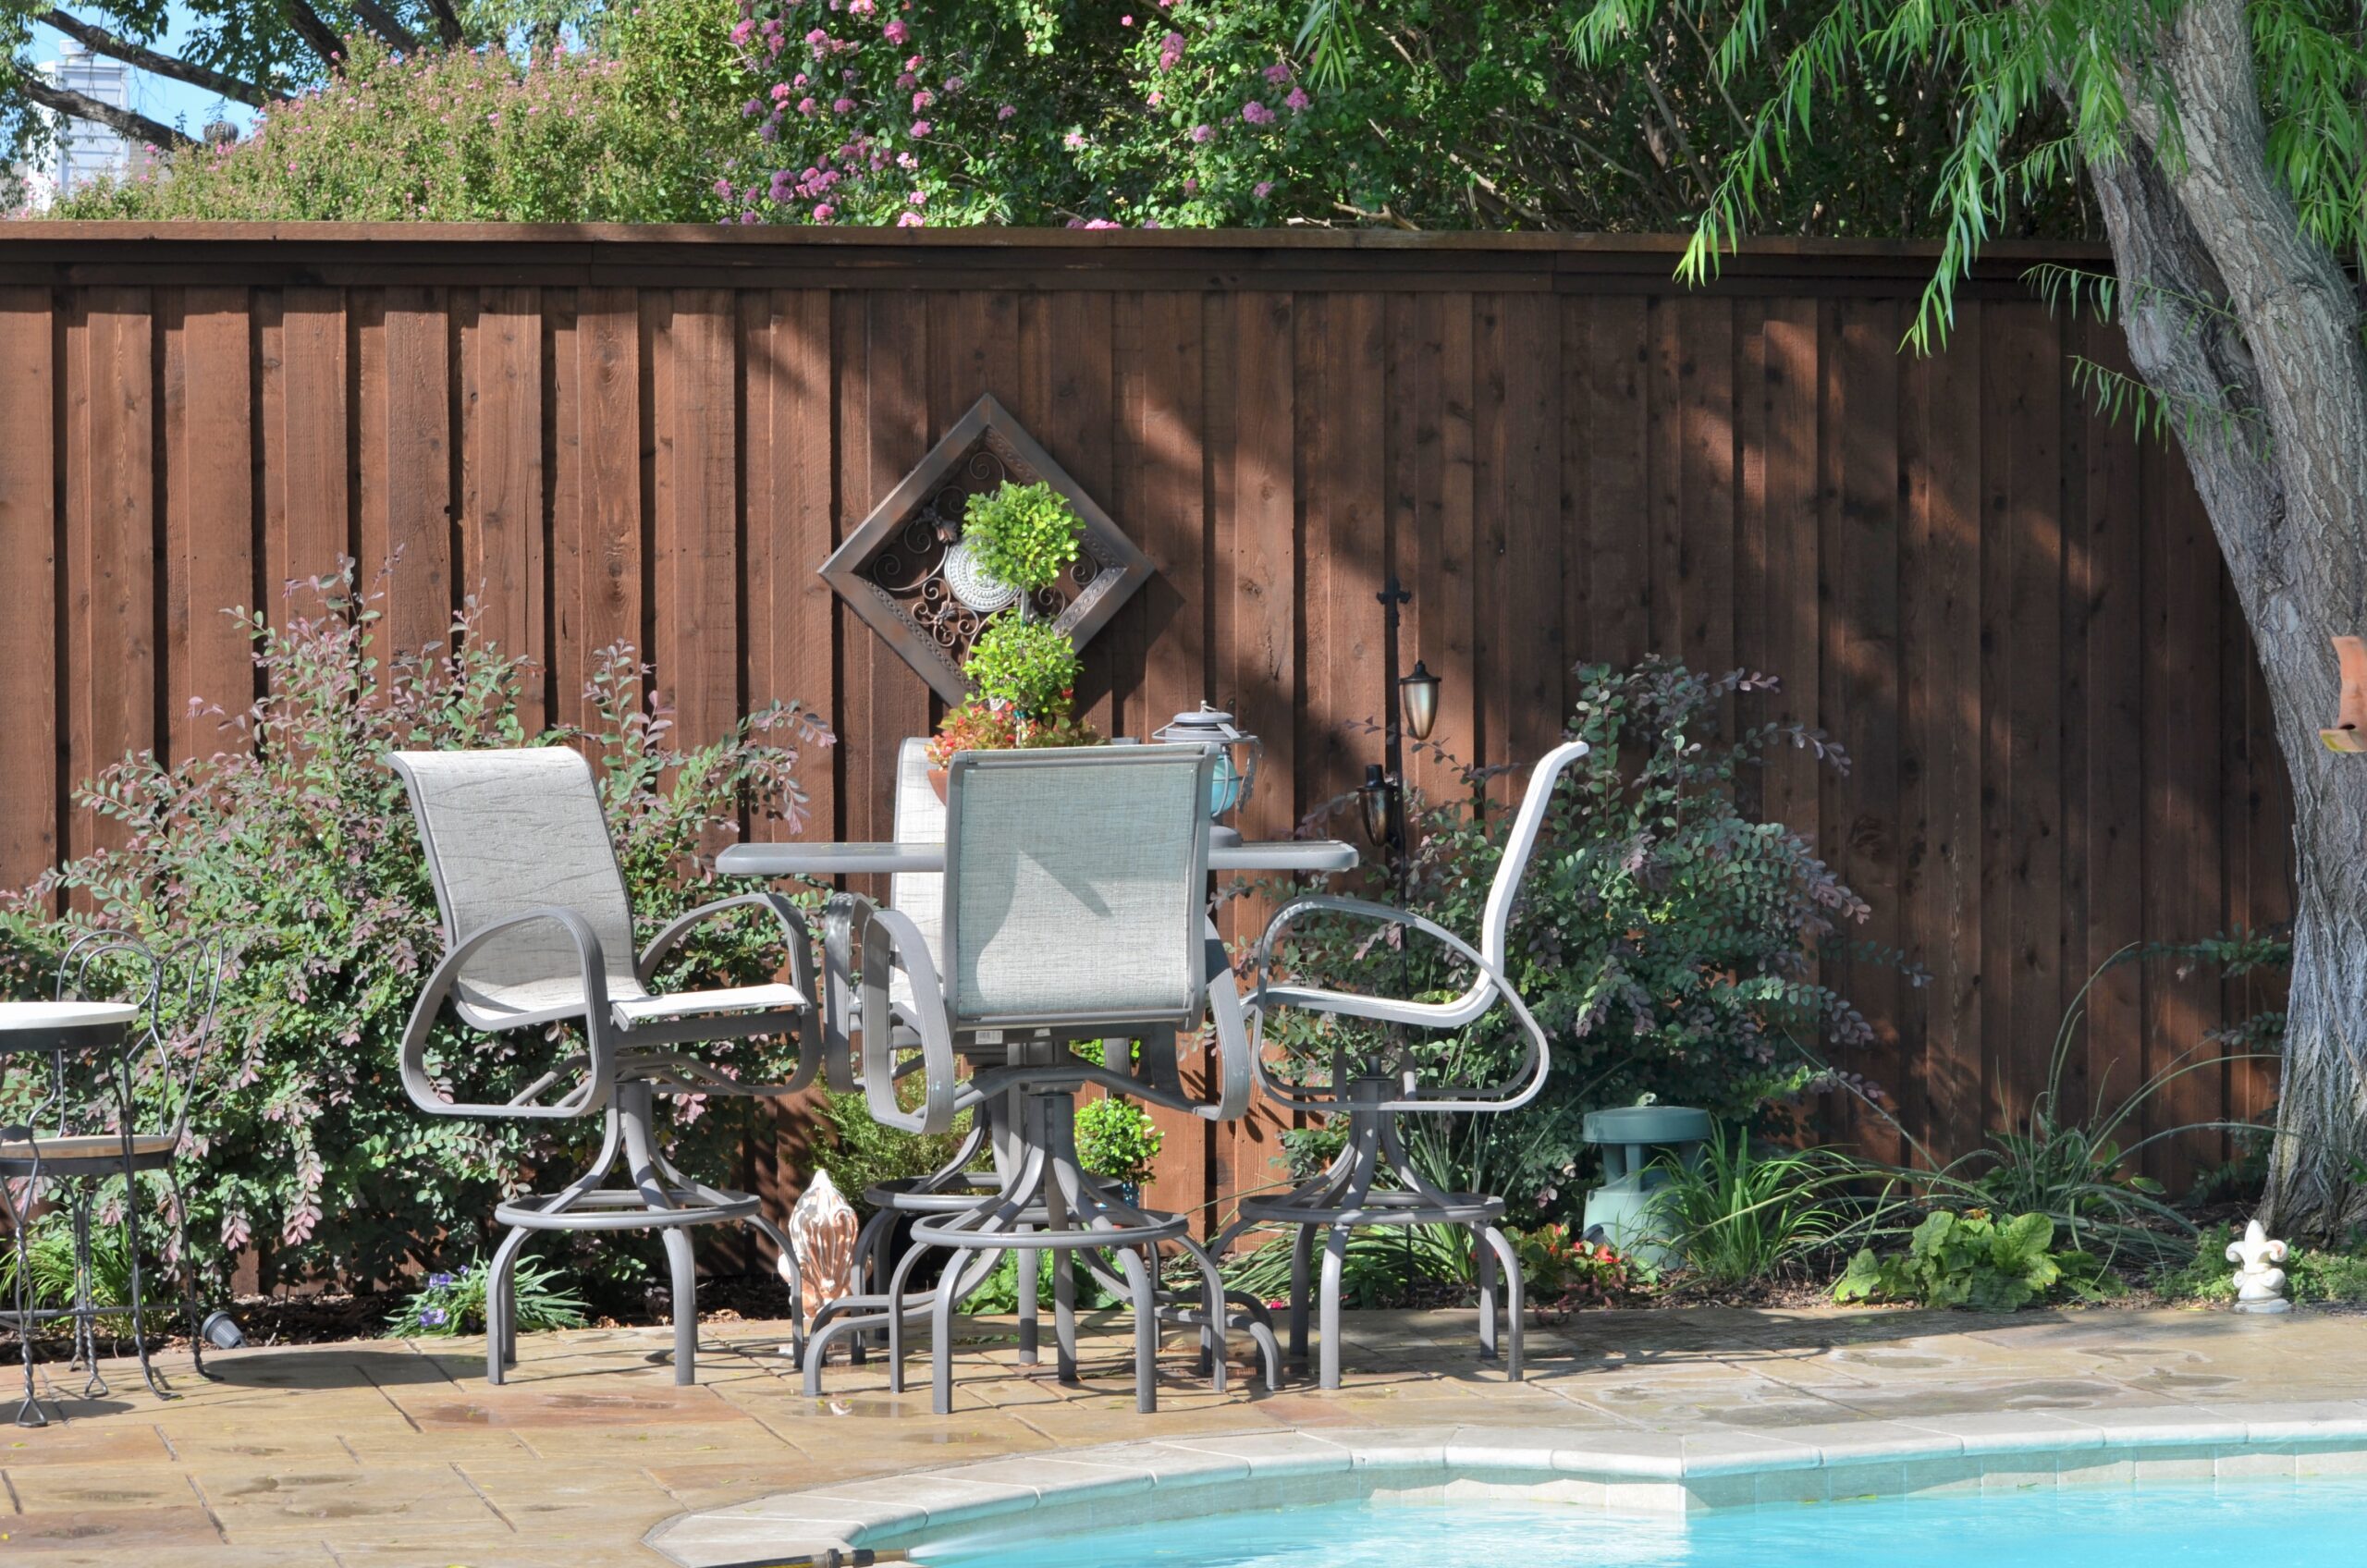 The poolside area with chairs and a table.